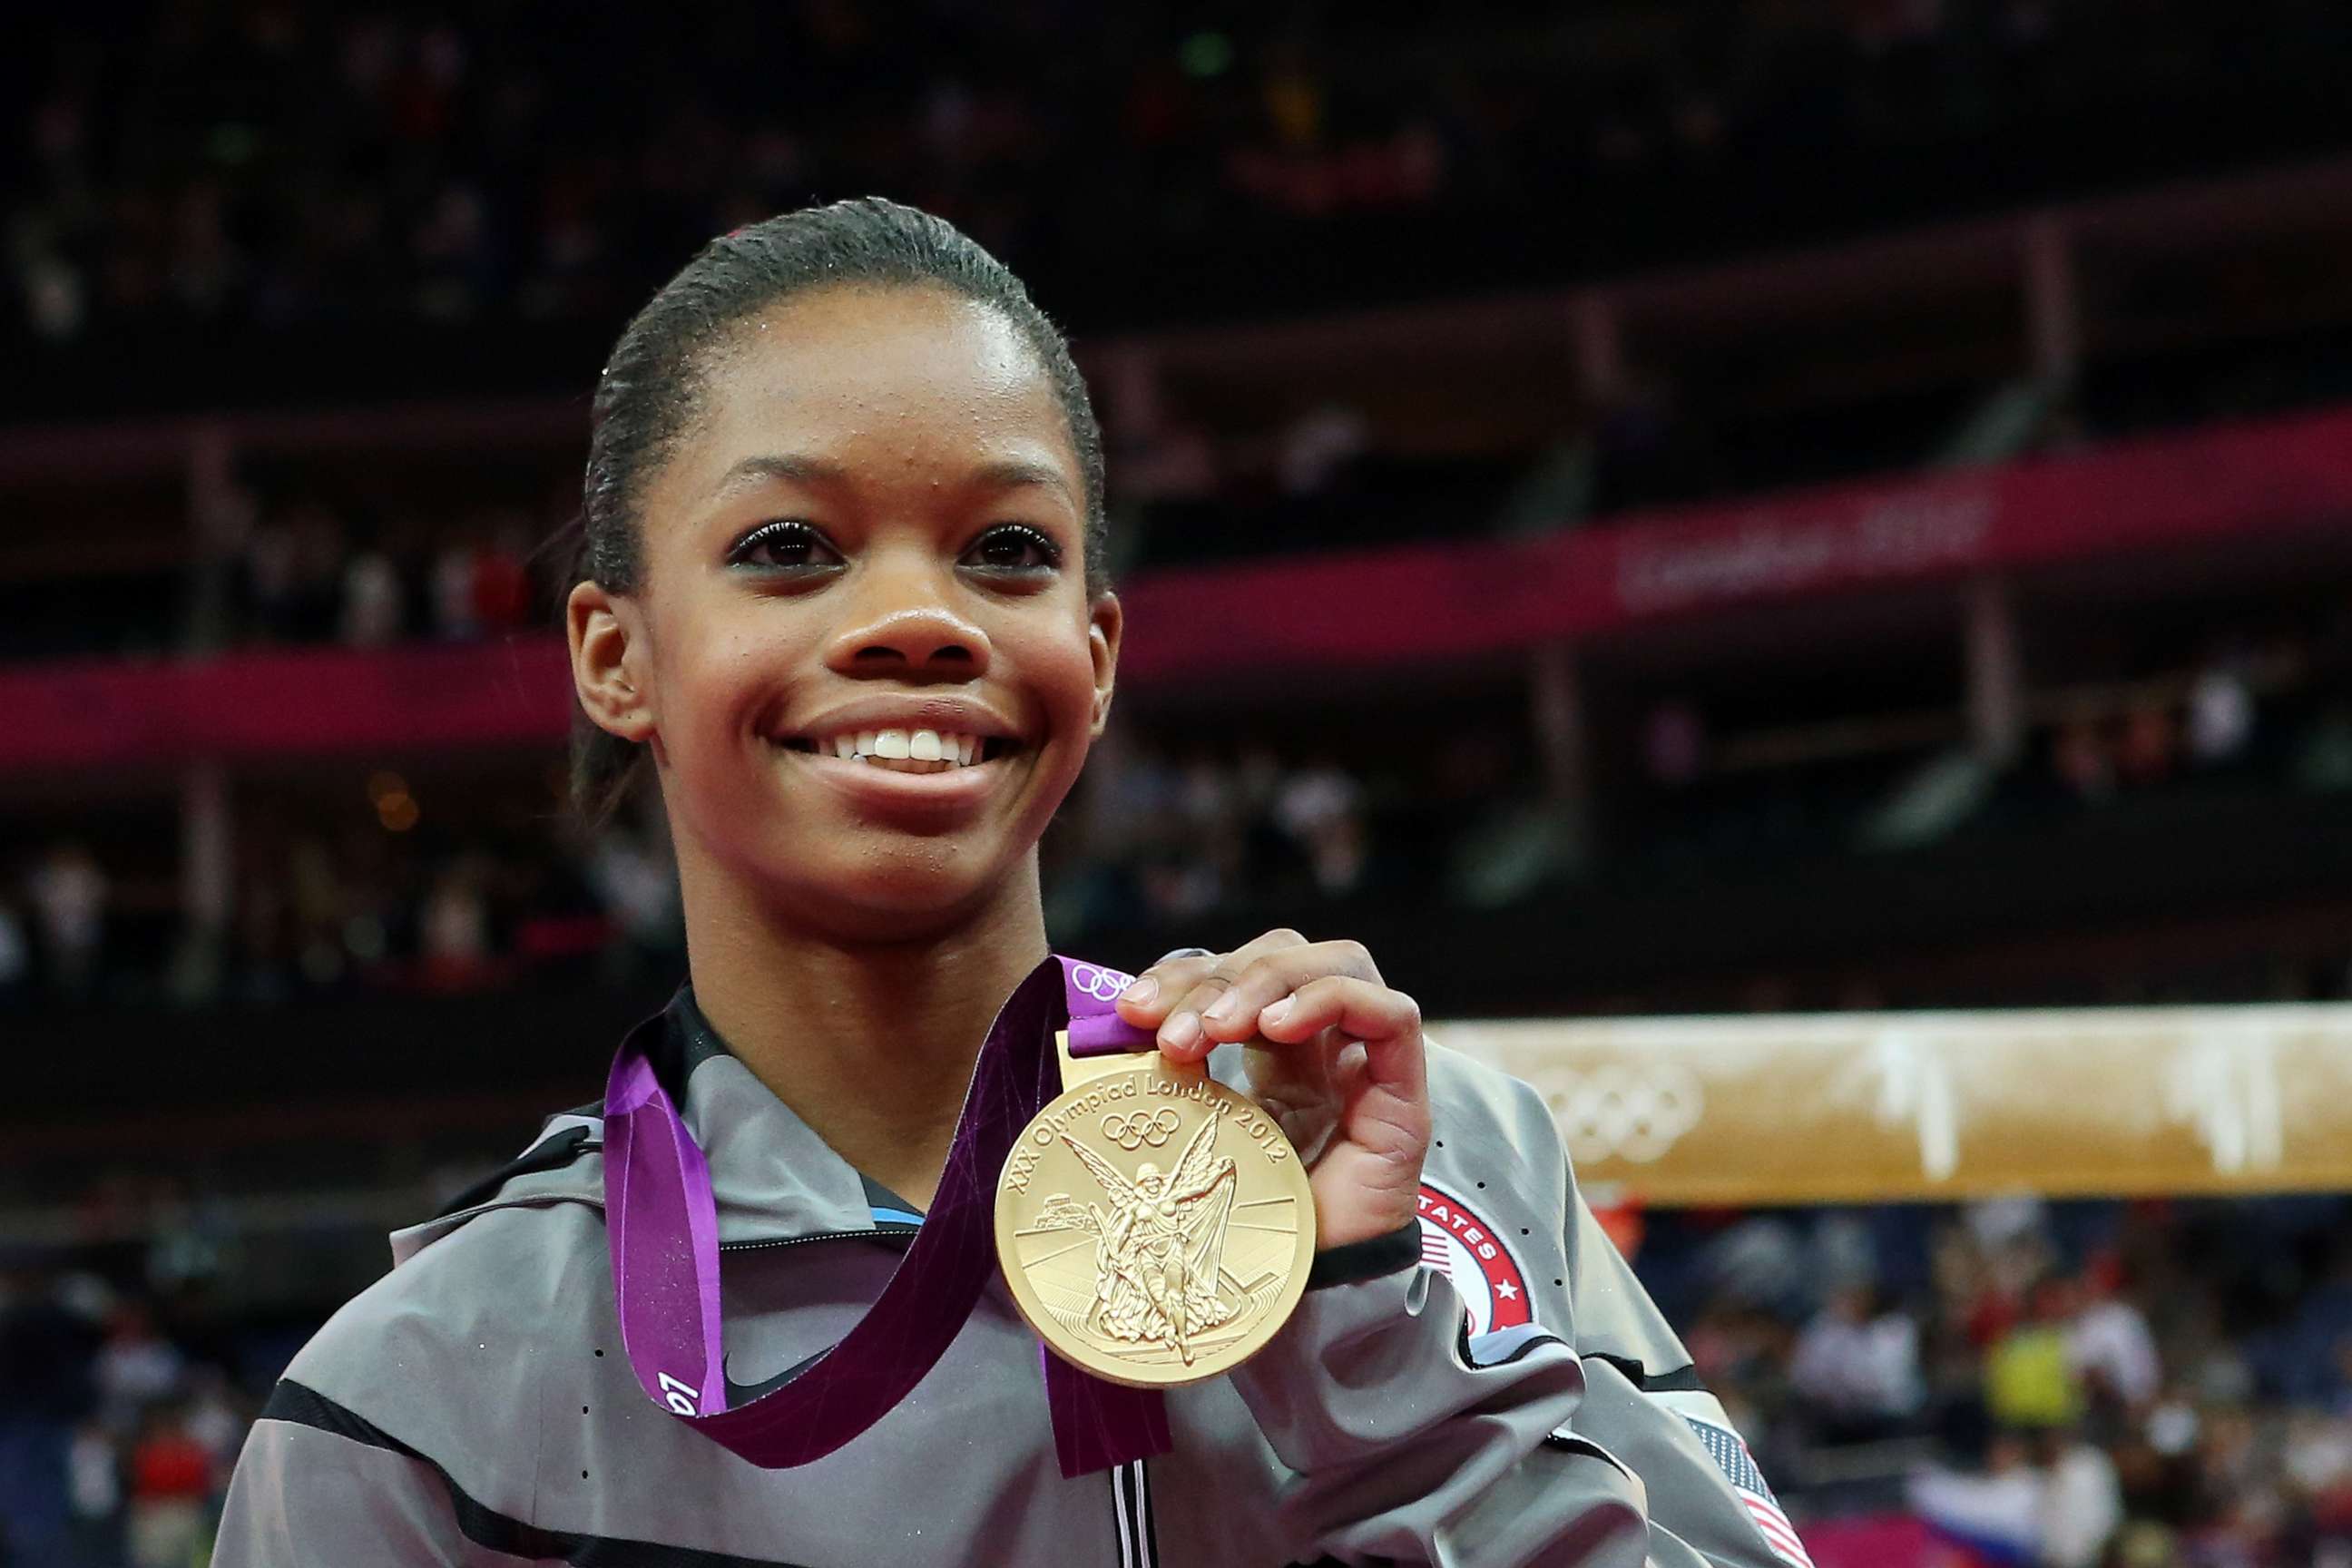 PHOTO: In this Aug. 2, 2012, file photo, Gabrielle Douglas of the United States celebrates after winning the gold medal in the Artistic Gymnastics Women's Individual All-Around final on Day 6 of the 2012 Olympic Games in London.